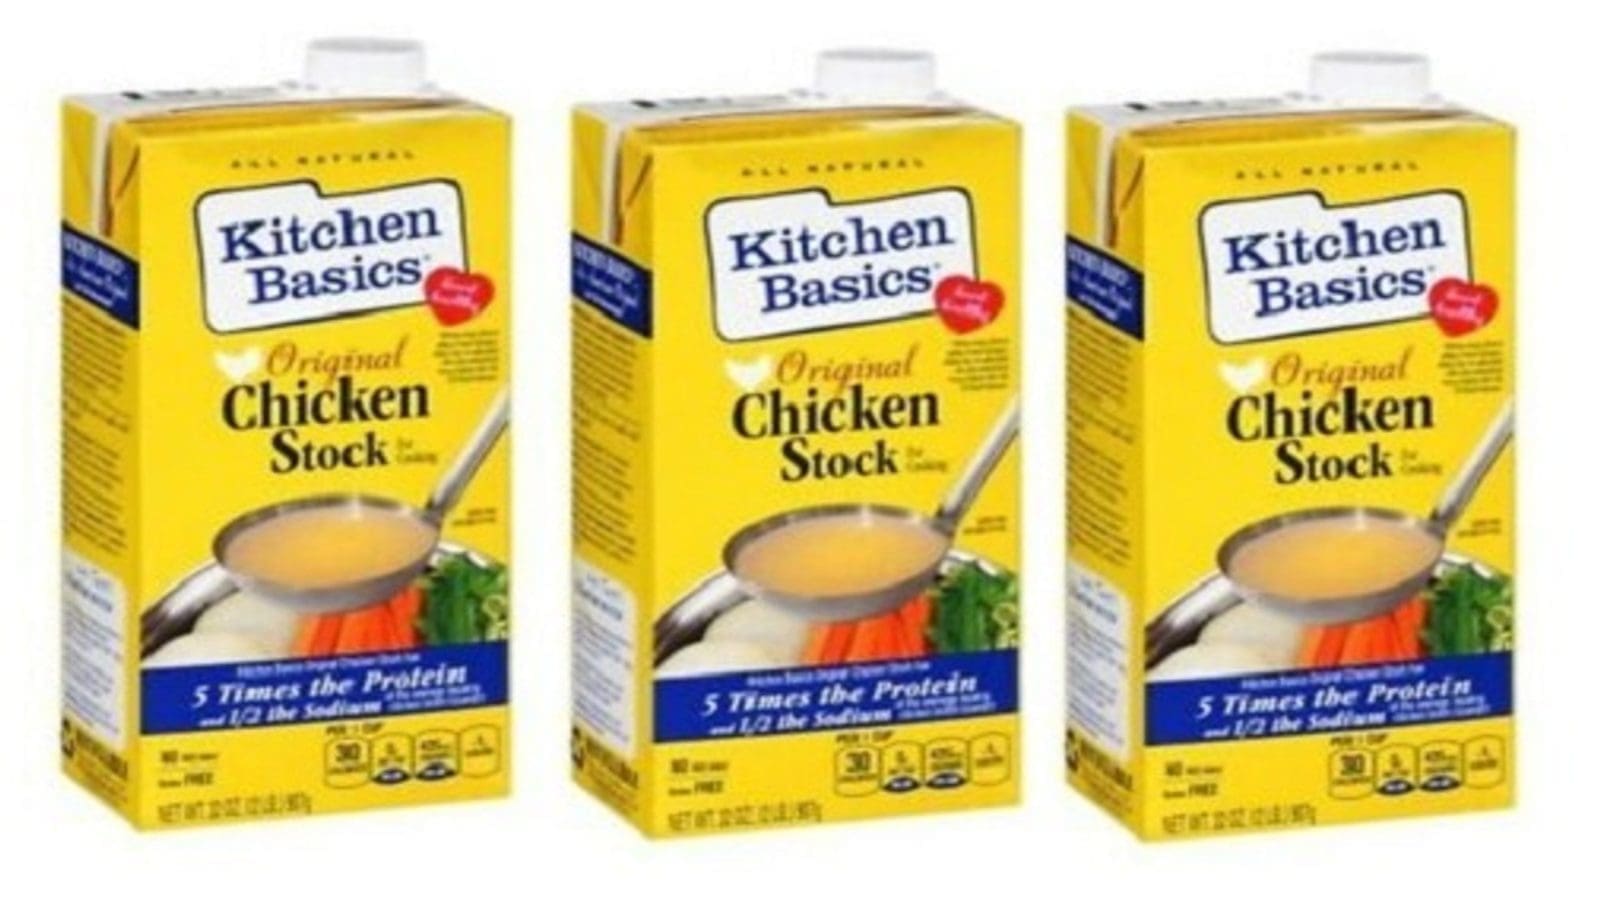 Del Monte Foods broadens stocks and broths business with acquisition of Kitchen Basics